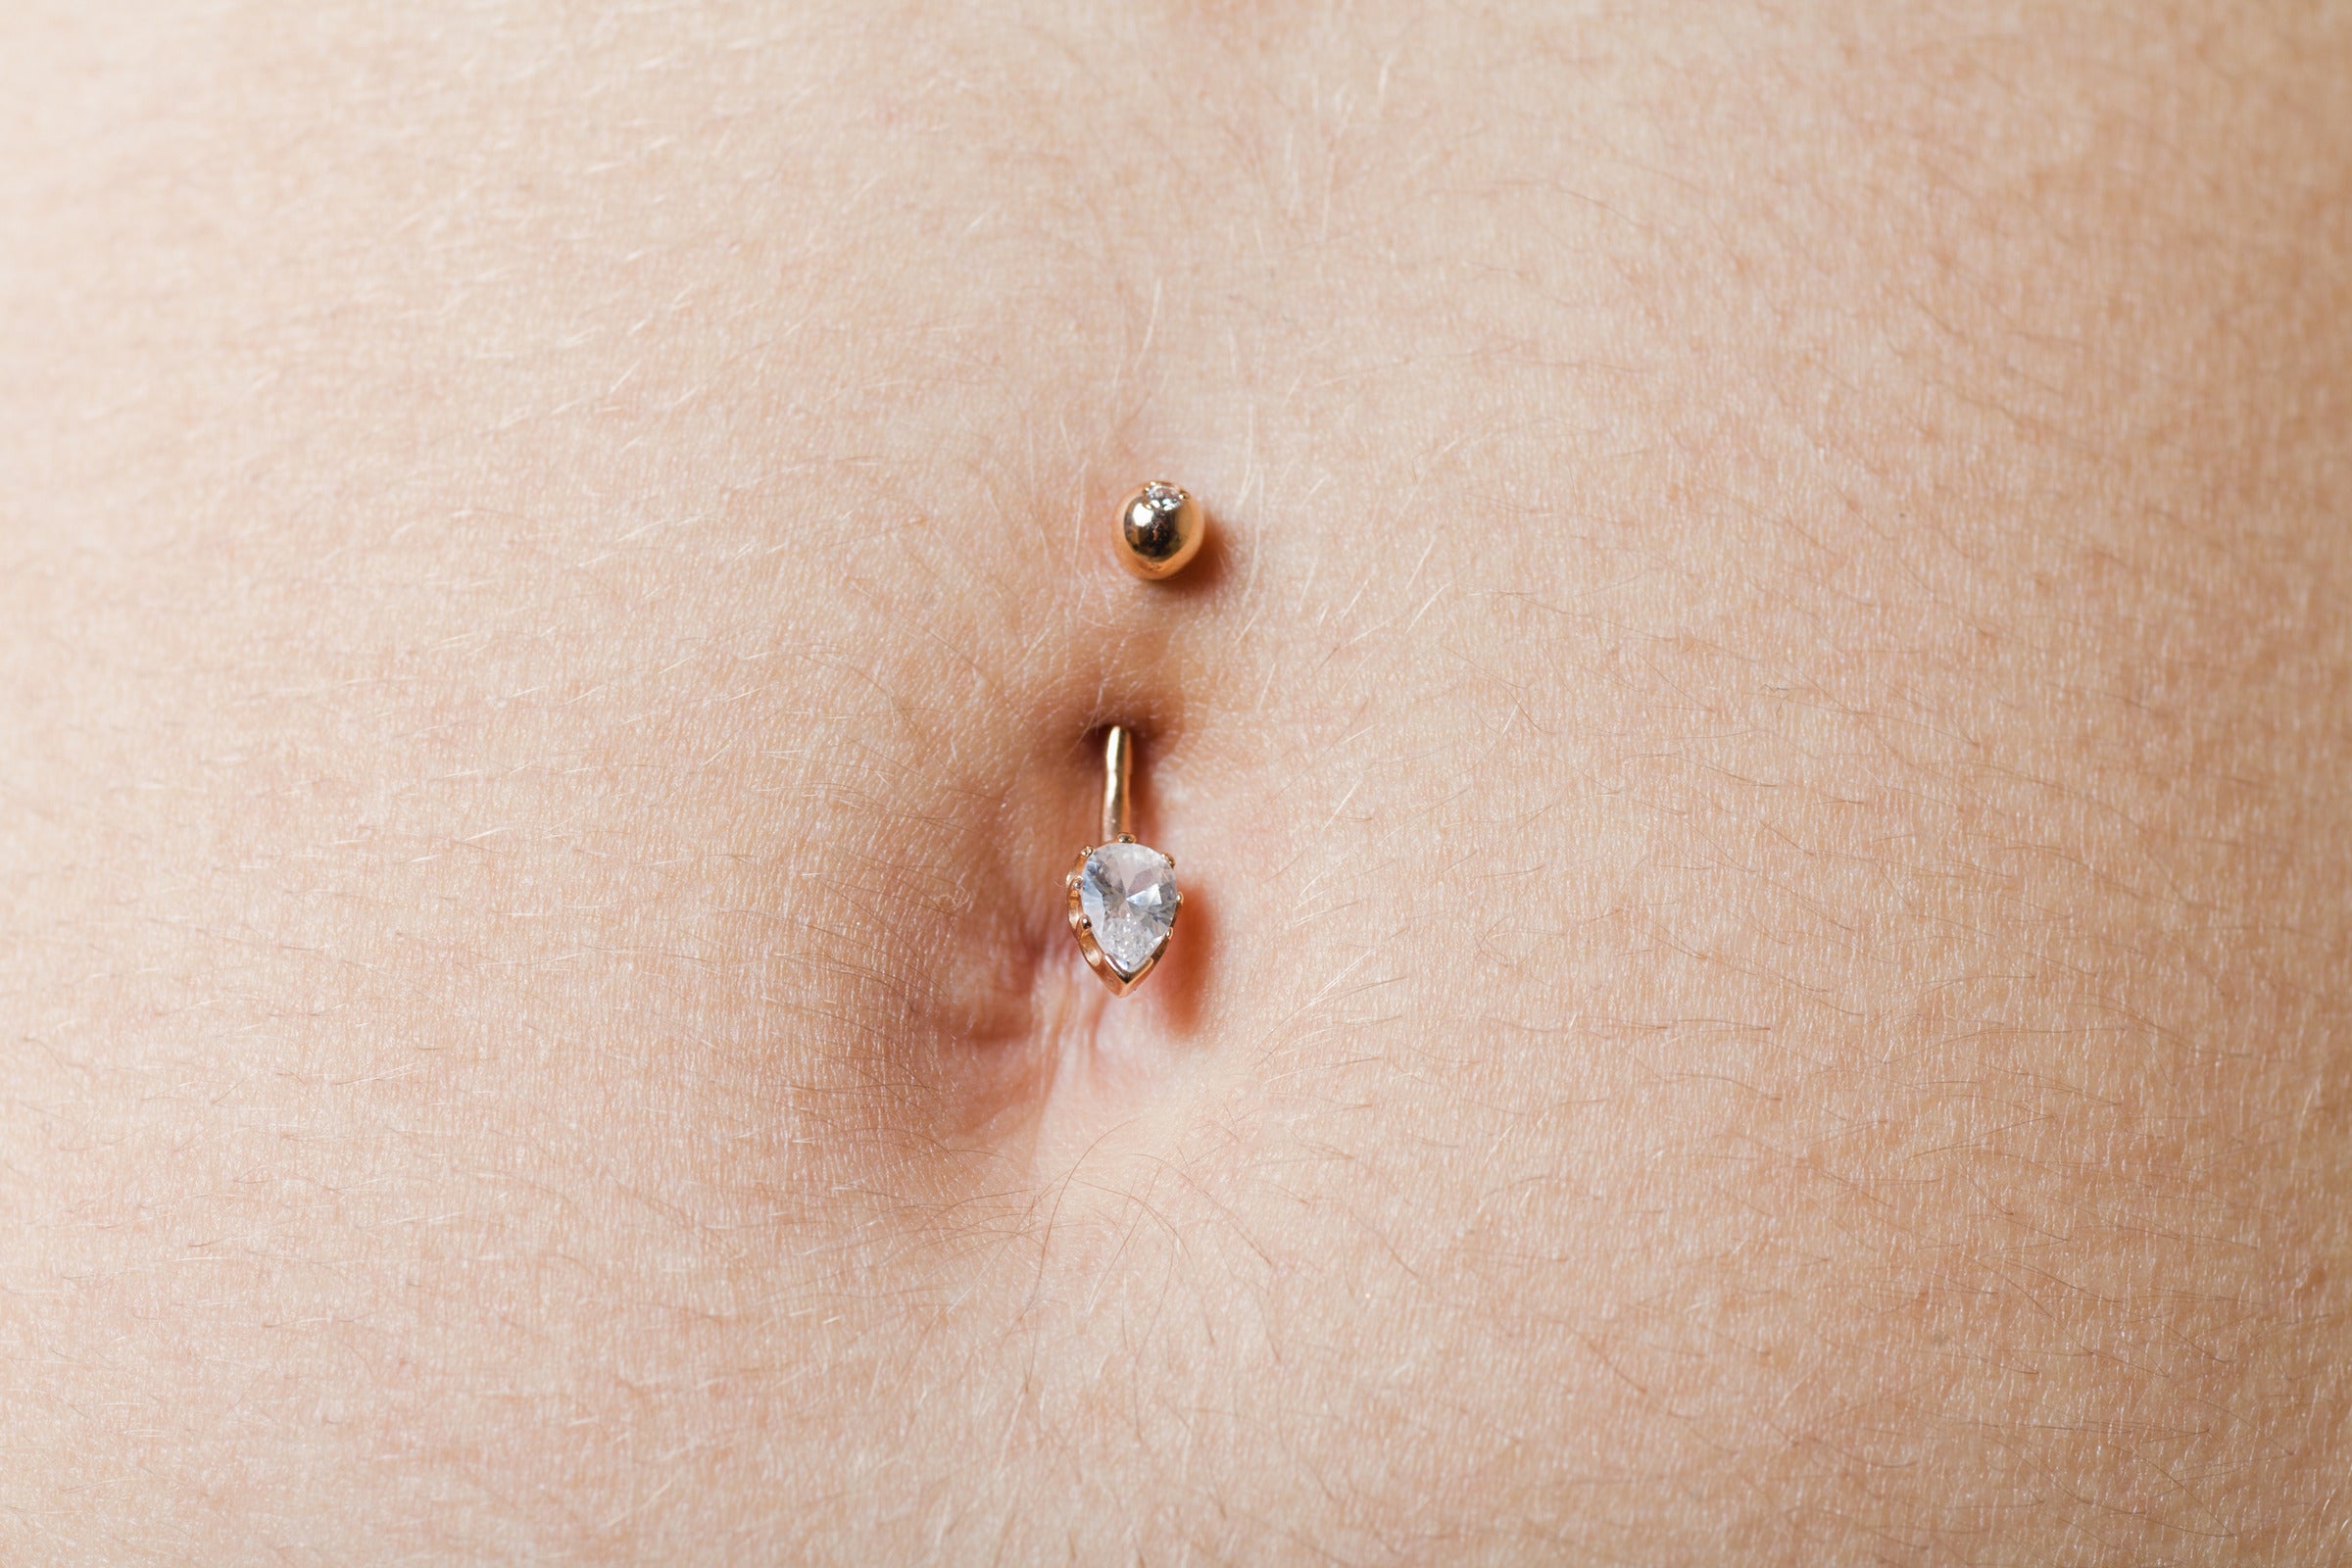 Heal Time & Factors for Belly Button Piercings